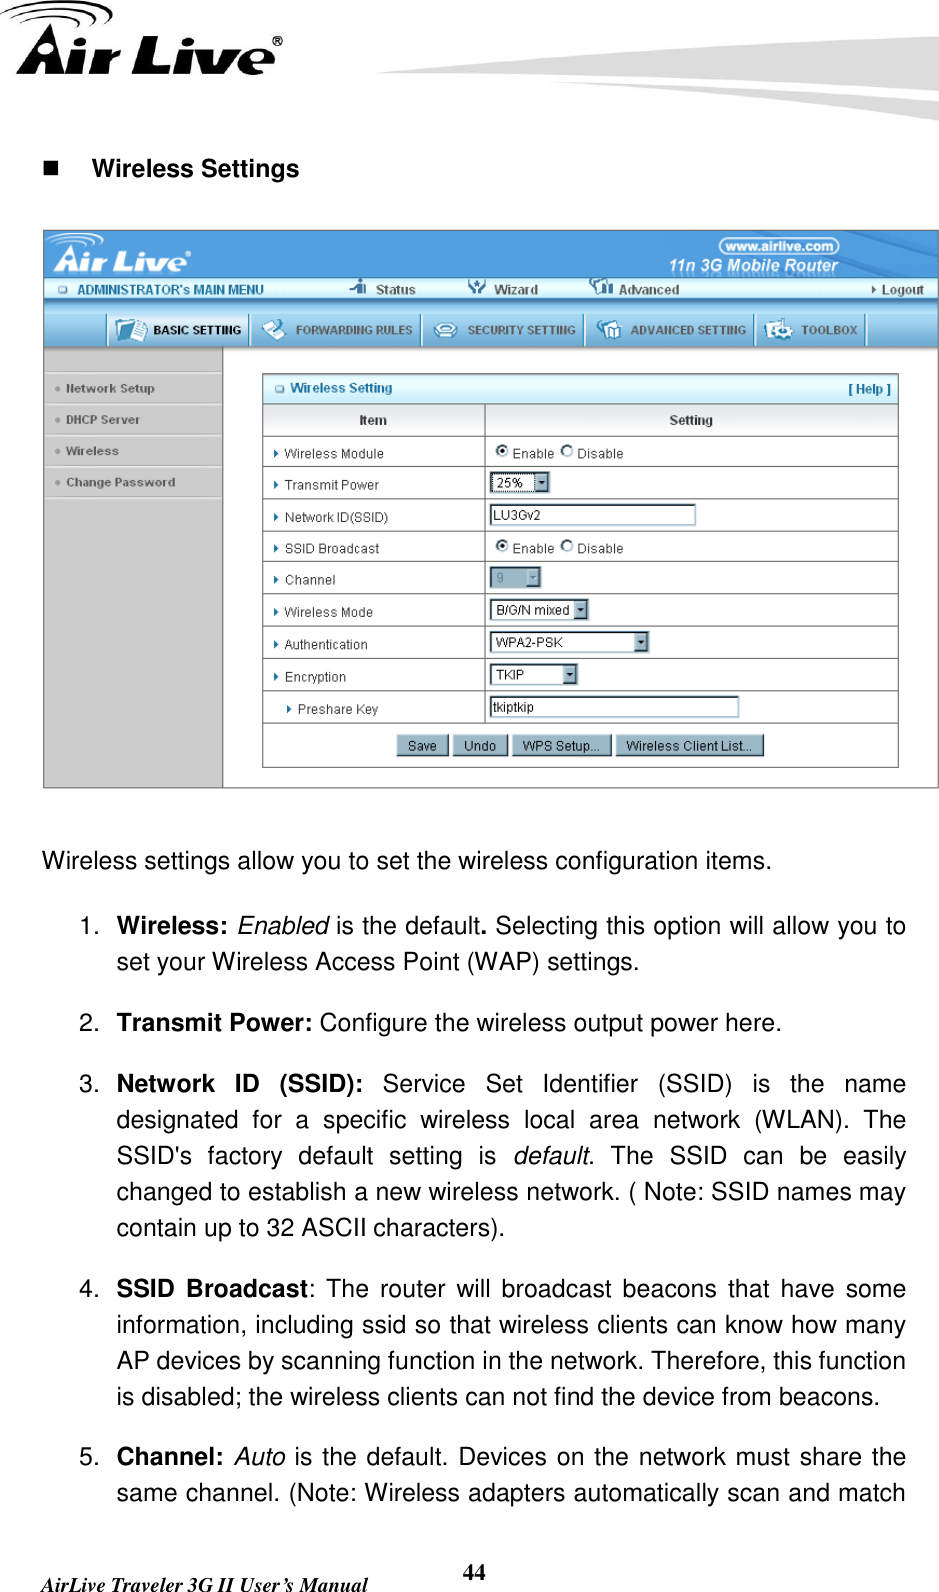   AirLive Traveler 3G II User’s Manual 44  Wireless Settings  Wireless settings allow you to set the wireless configuration items. 1. Wireless: Enabled is the default. Selecting this option will allow you to set your Wireless Access Point (WAP) settings. 2. Transmit Power: Configure the wireless output power here. 3. Network  ID  (SSID):  Service  Set  Identifier  (SSID)  is  the  name designated  for  a  specific  wireless  local  area  network  (WLAN).  The SSID&apos;s  factory  default  setting  is  default.  The  SSID  can  be  easily changed to establish a new wireless network. ( Note: SSID names may contain up to 32 ASCII characters). 4. SSID Broadcast: The router  will  broadcast beacons that have some information, including ssid so that wireless clients can know how many AP devices by scanning function in the network. Therefore, this function is disabled; the wireless clients can not find the device from beacons. 5. Channel: Auto is the default. Devices on the network must share the same channel. (Note: Wireless adapters automatically scan and match 